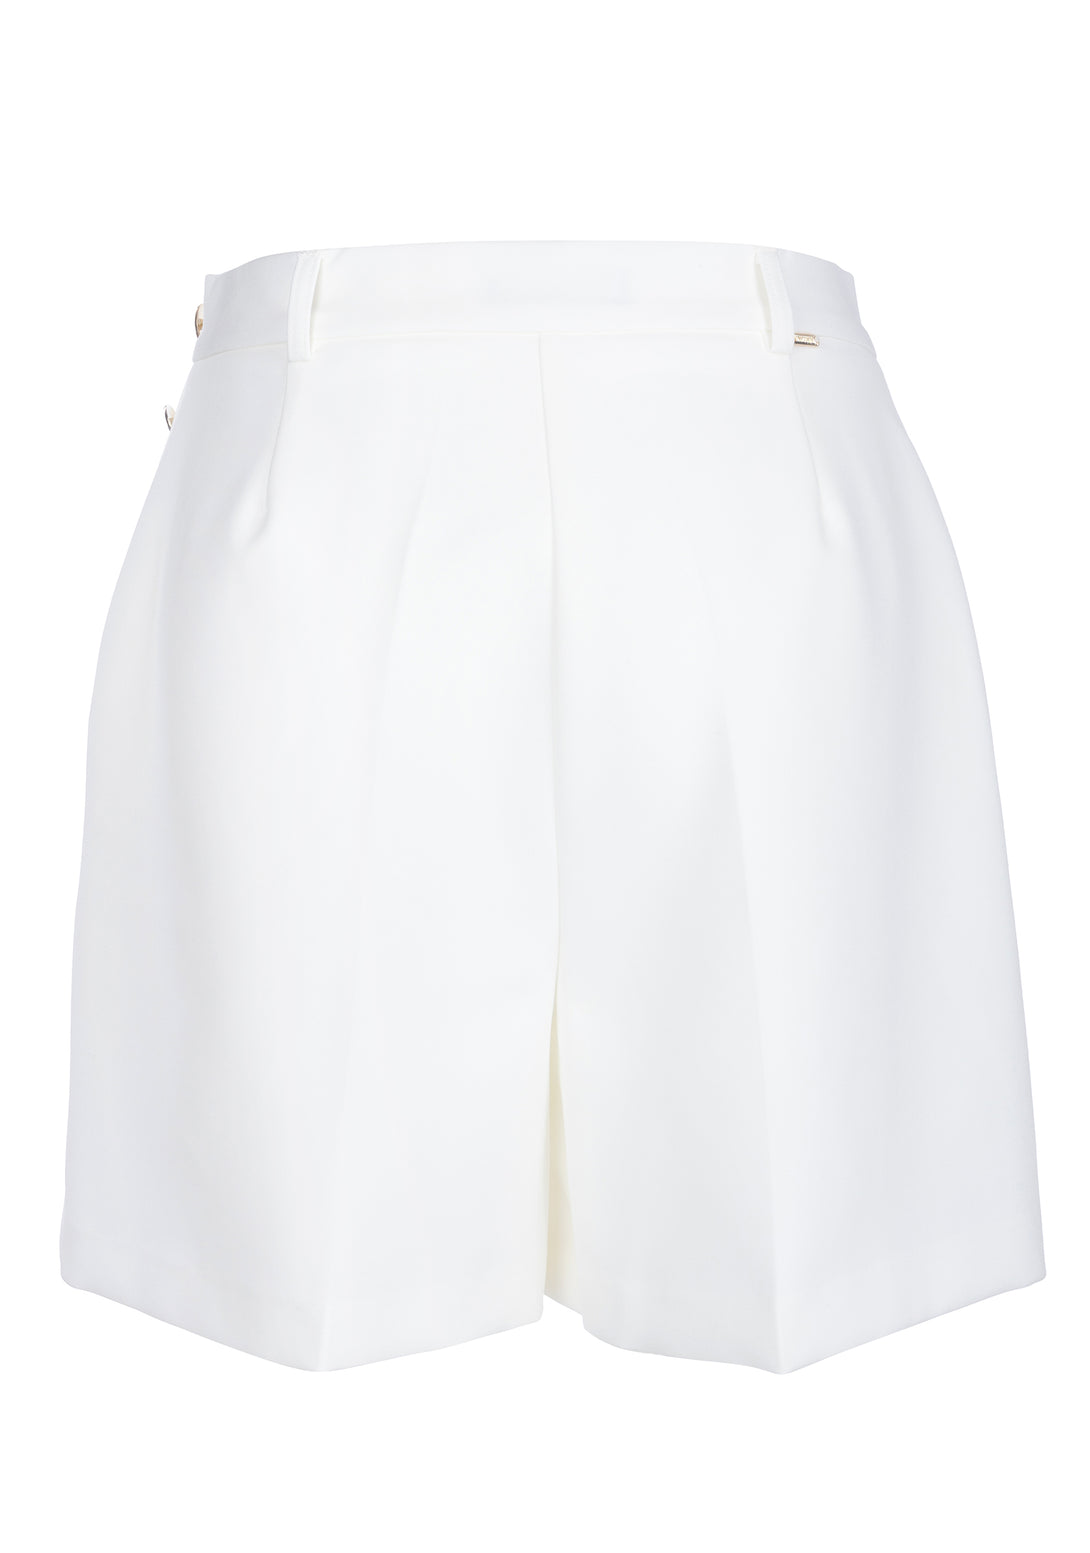 Short pant regular fit made in technical stretch fabric